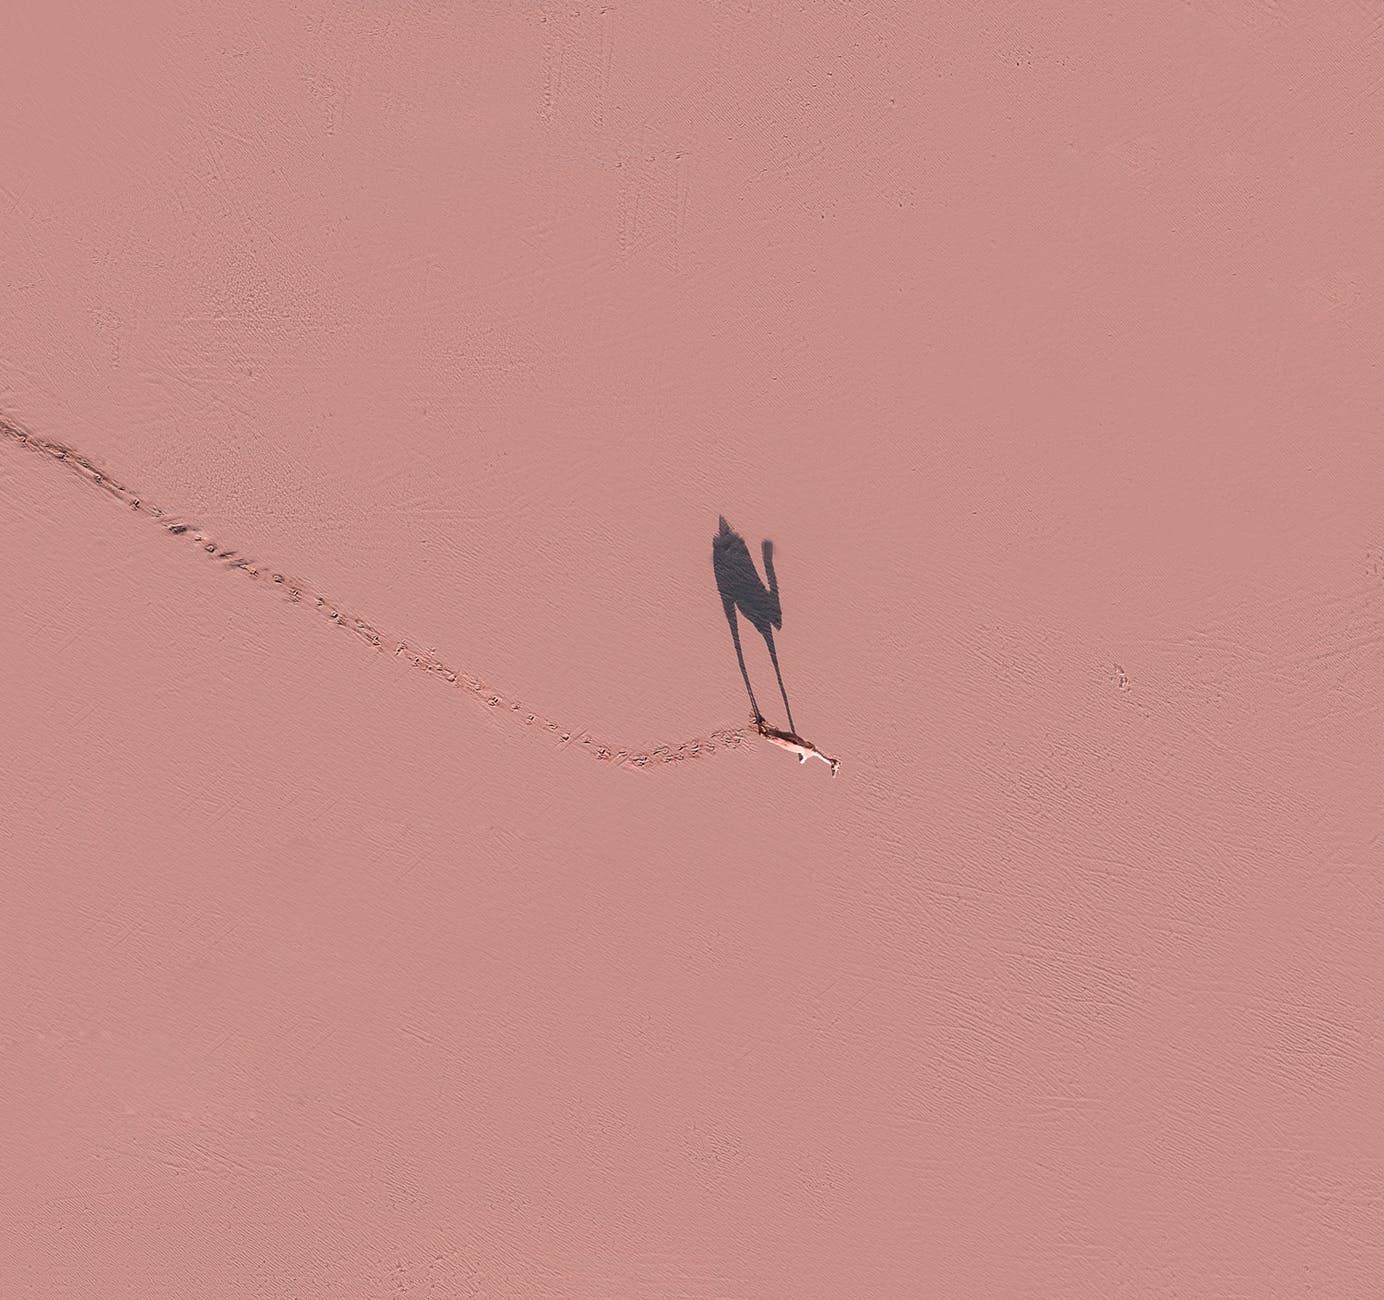 camel walking on pink surface in sunny day